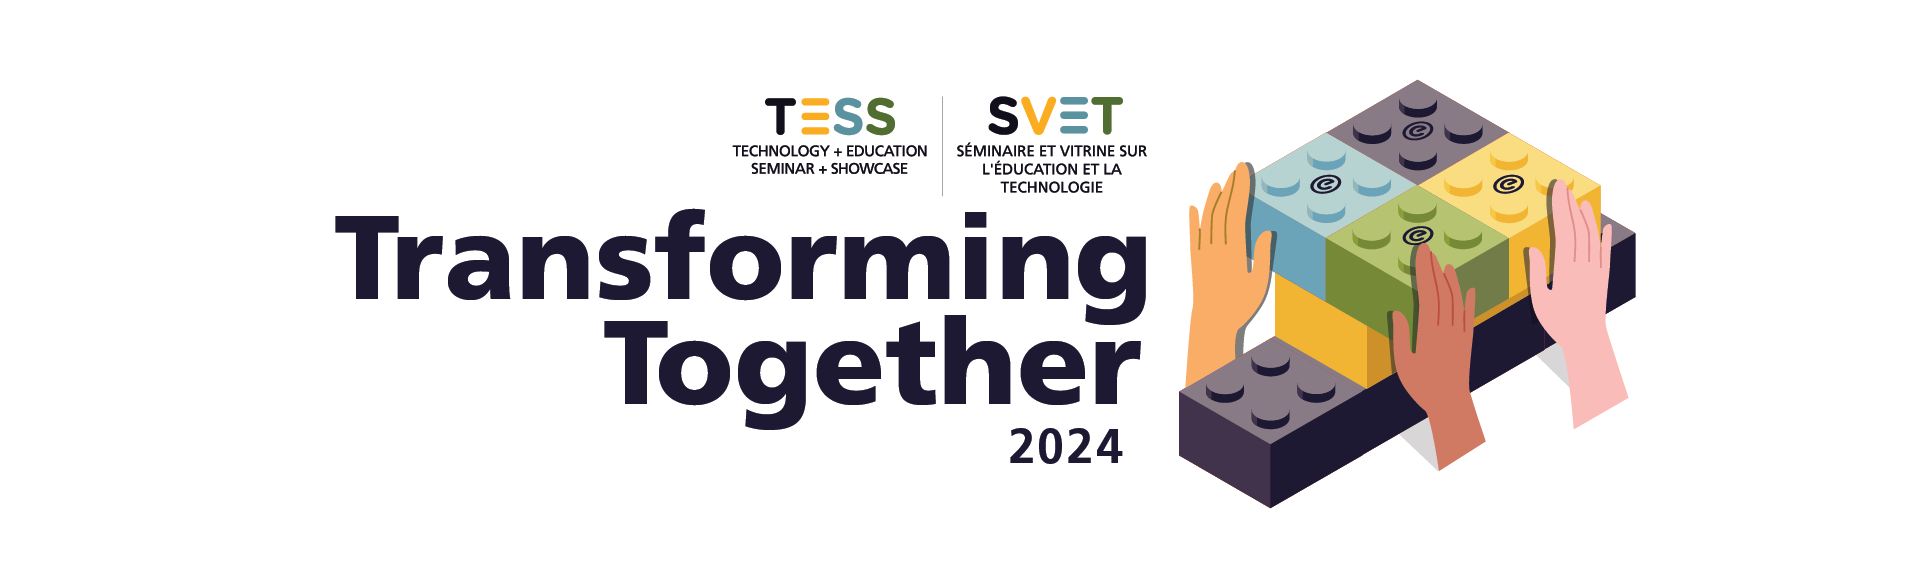 TESS 2023 Supporting the Digitally Empowered Learner